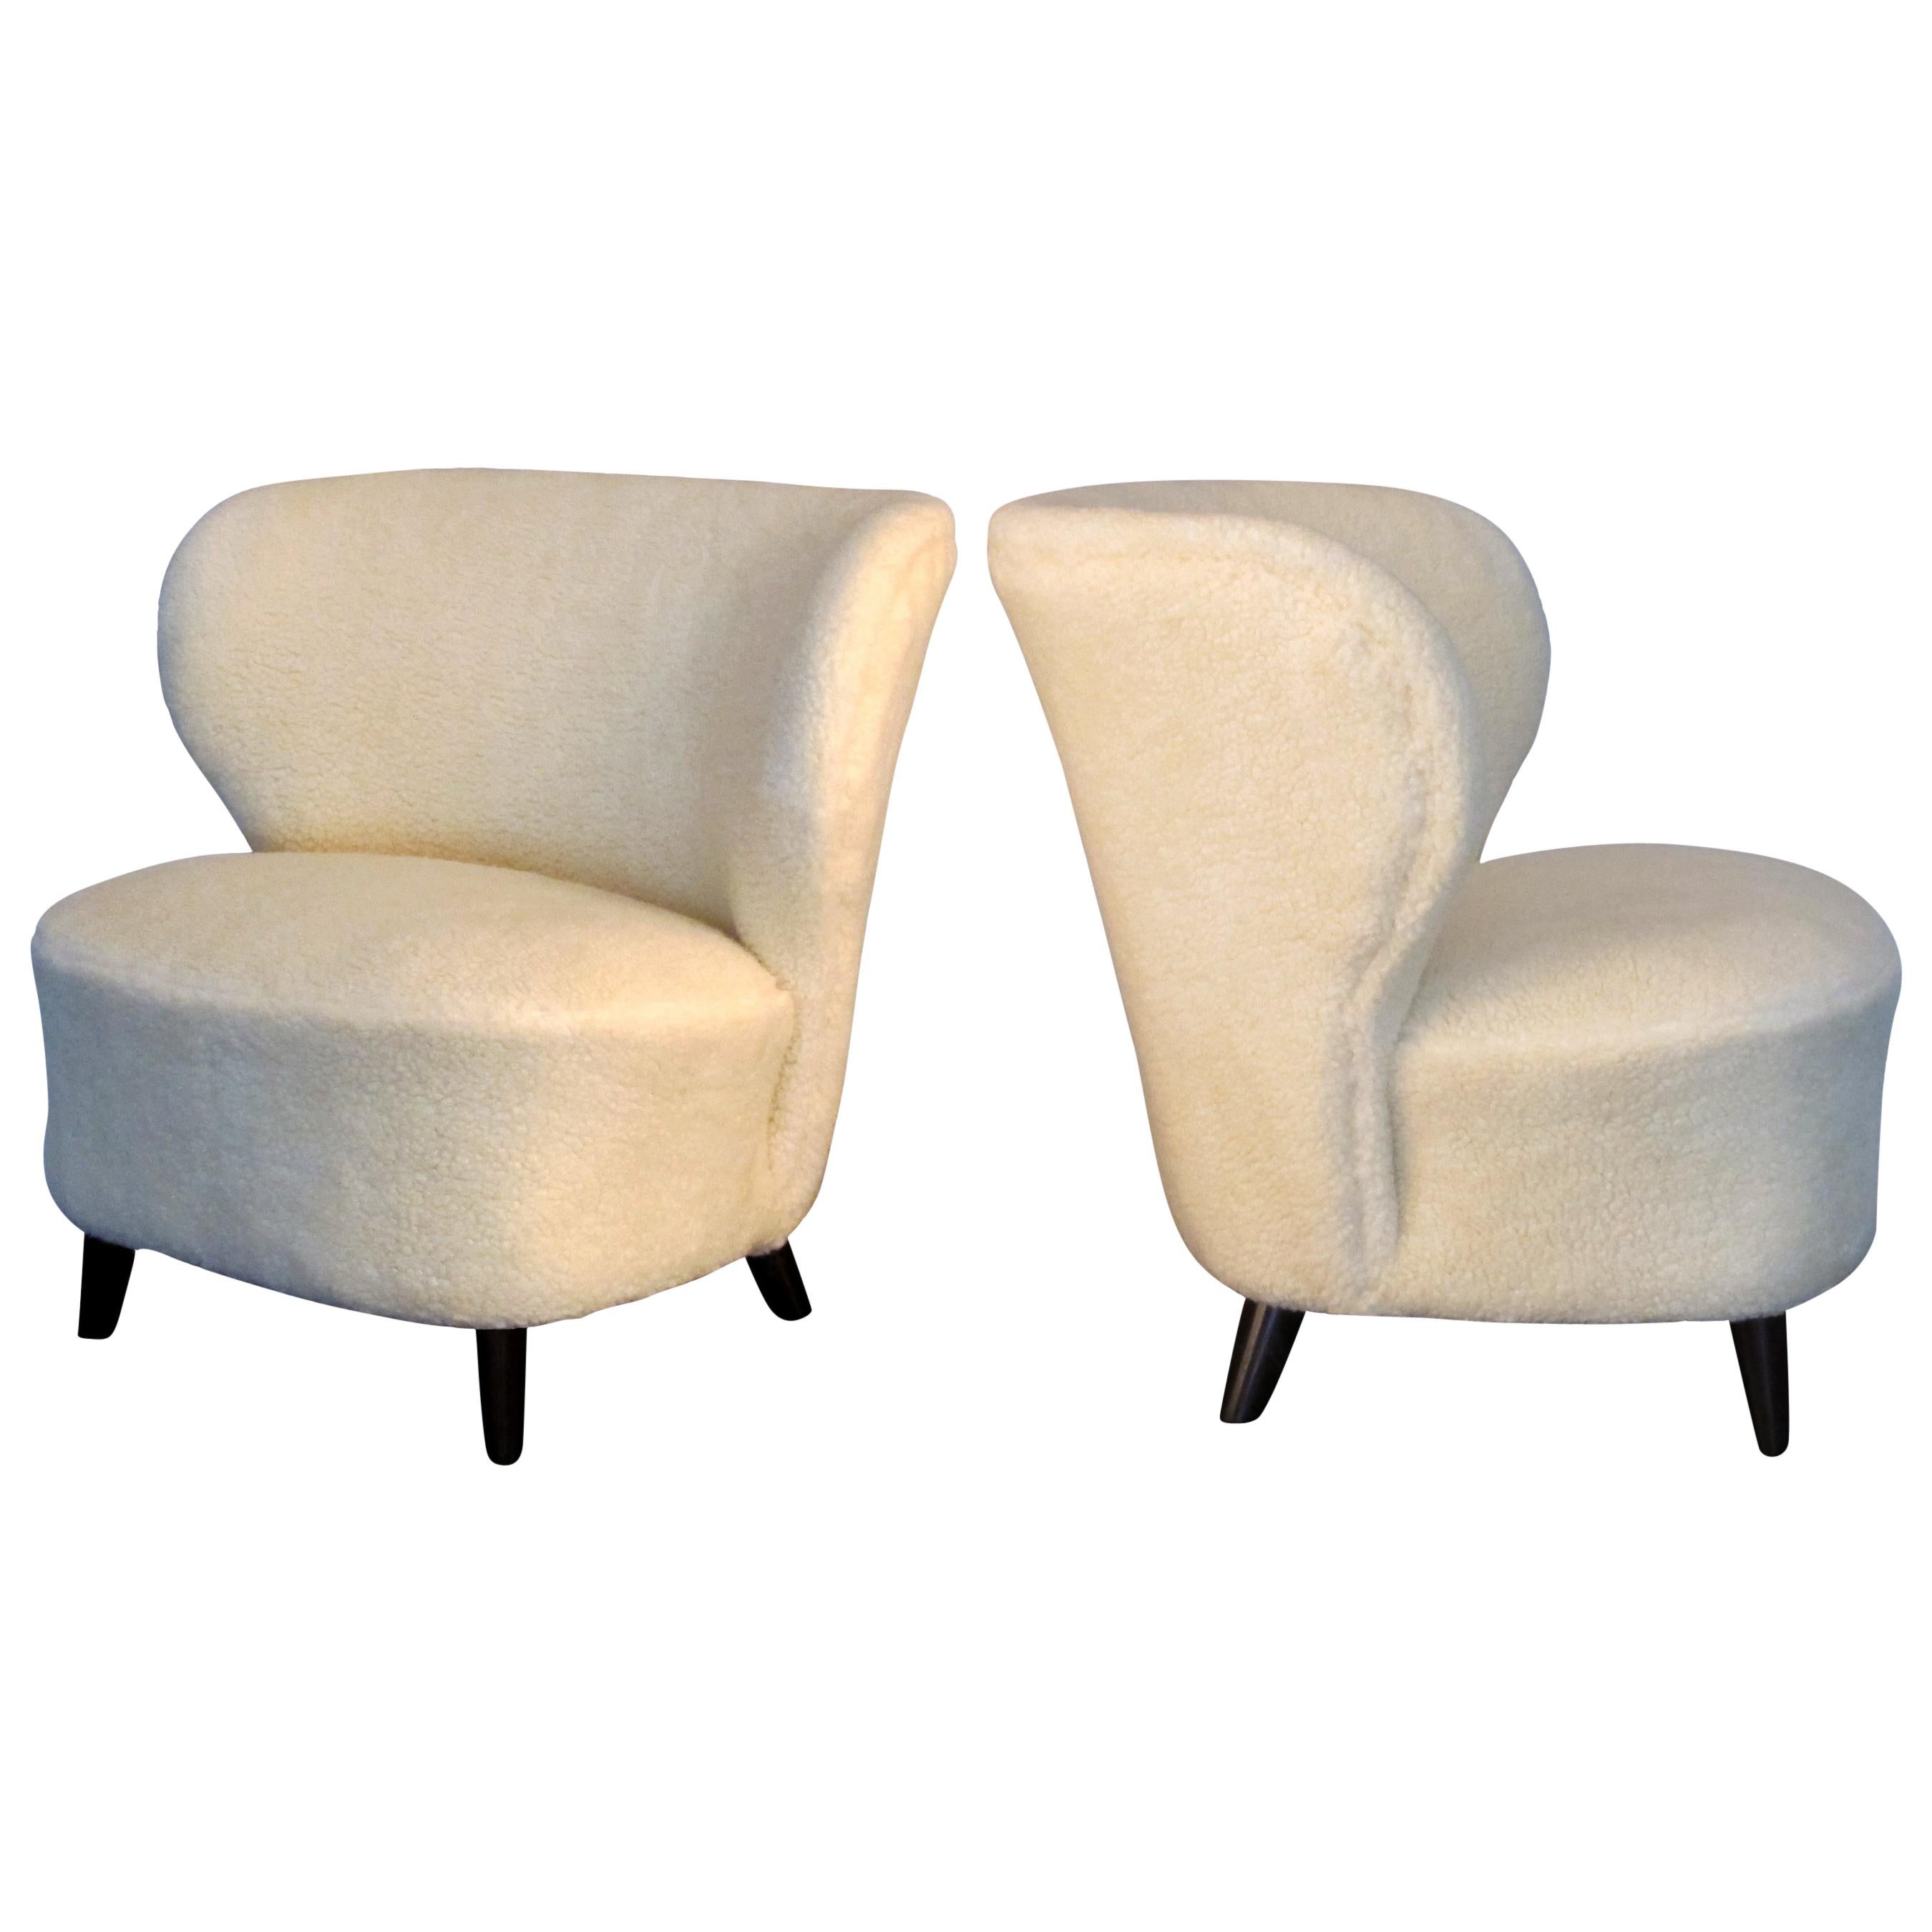 Pair of 1940s Finnish Curved Wingback Lounge Armchairs in Soft Lambskin Fabric